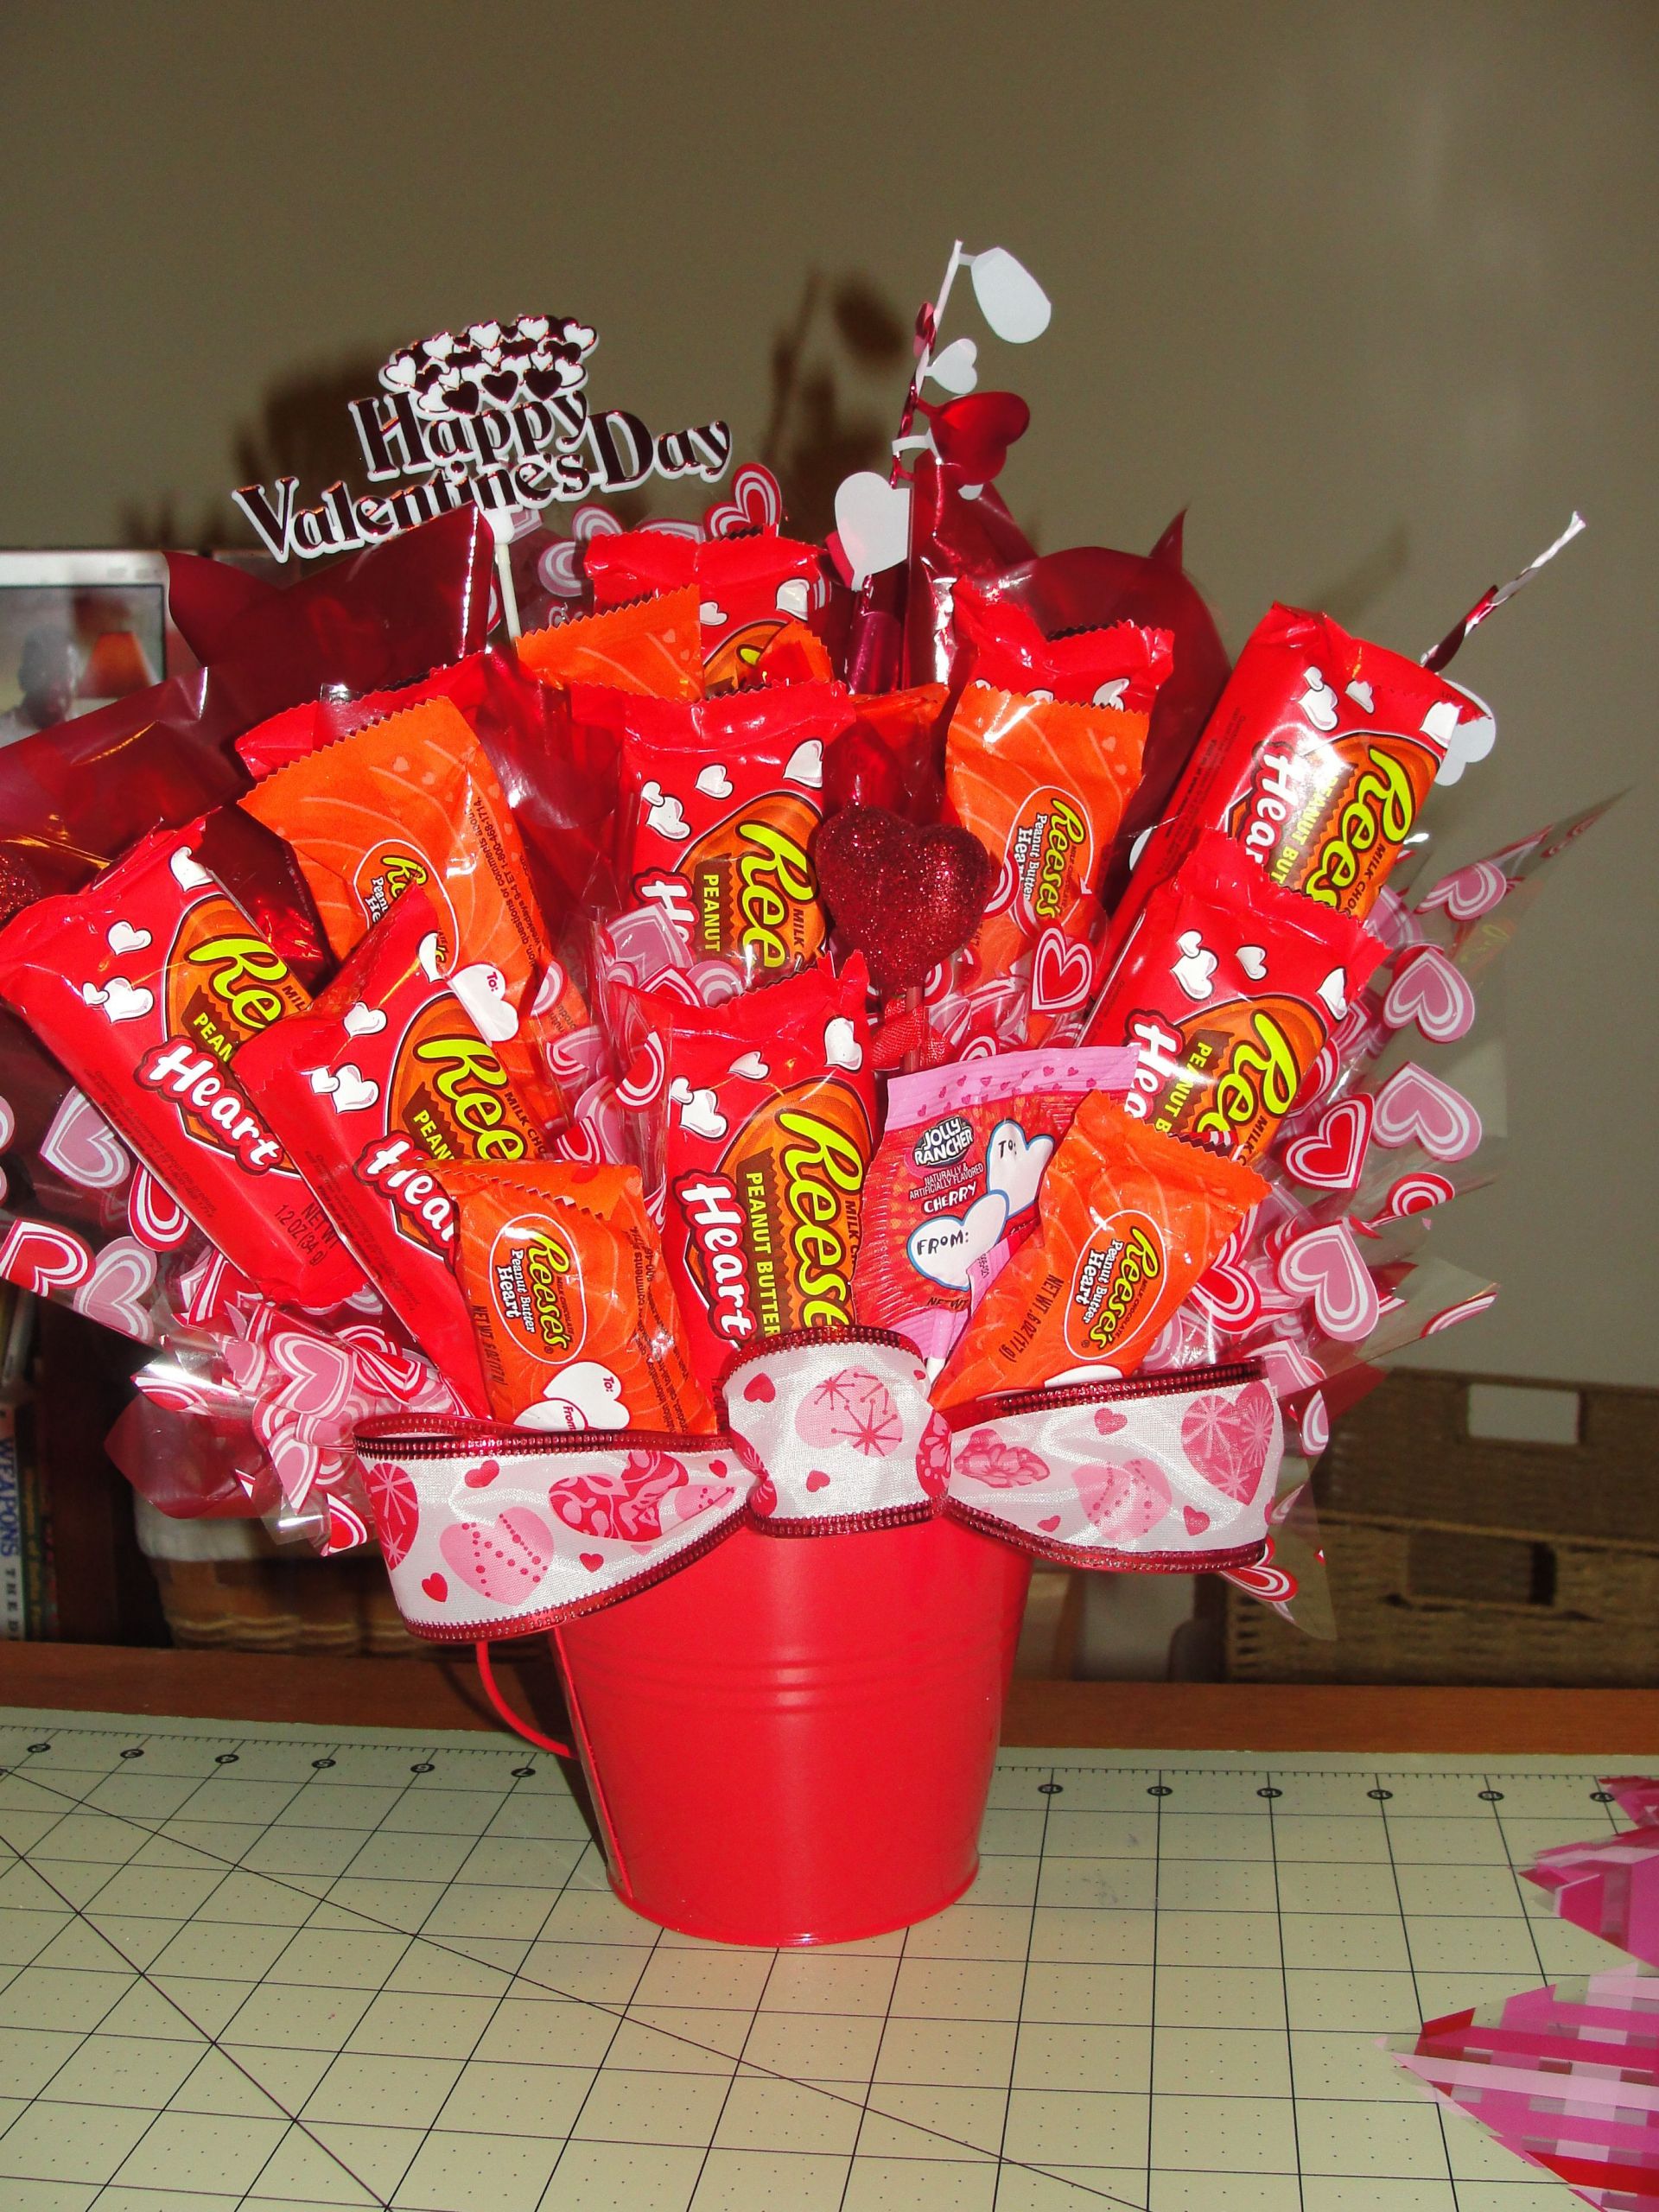 Valentines Day Candy Gift Ideas
 Reece s Valentines Day Bouquet